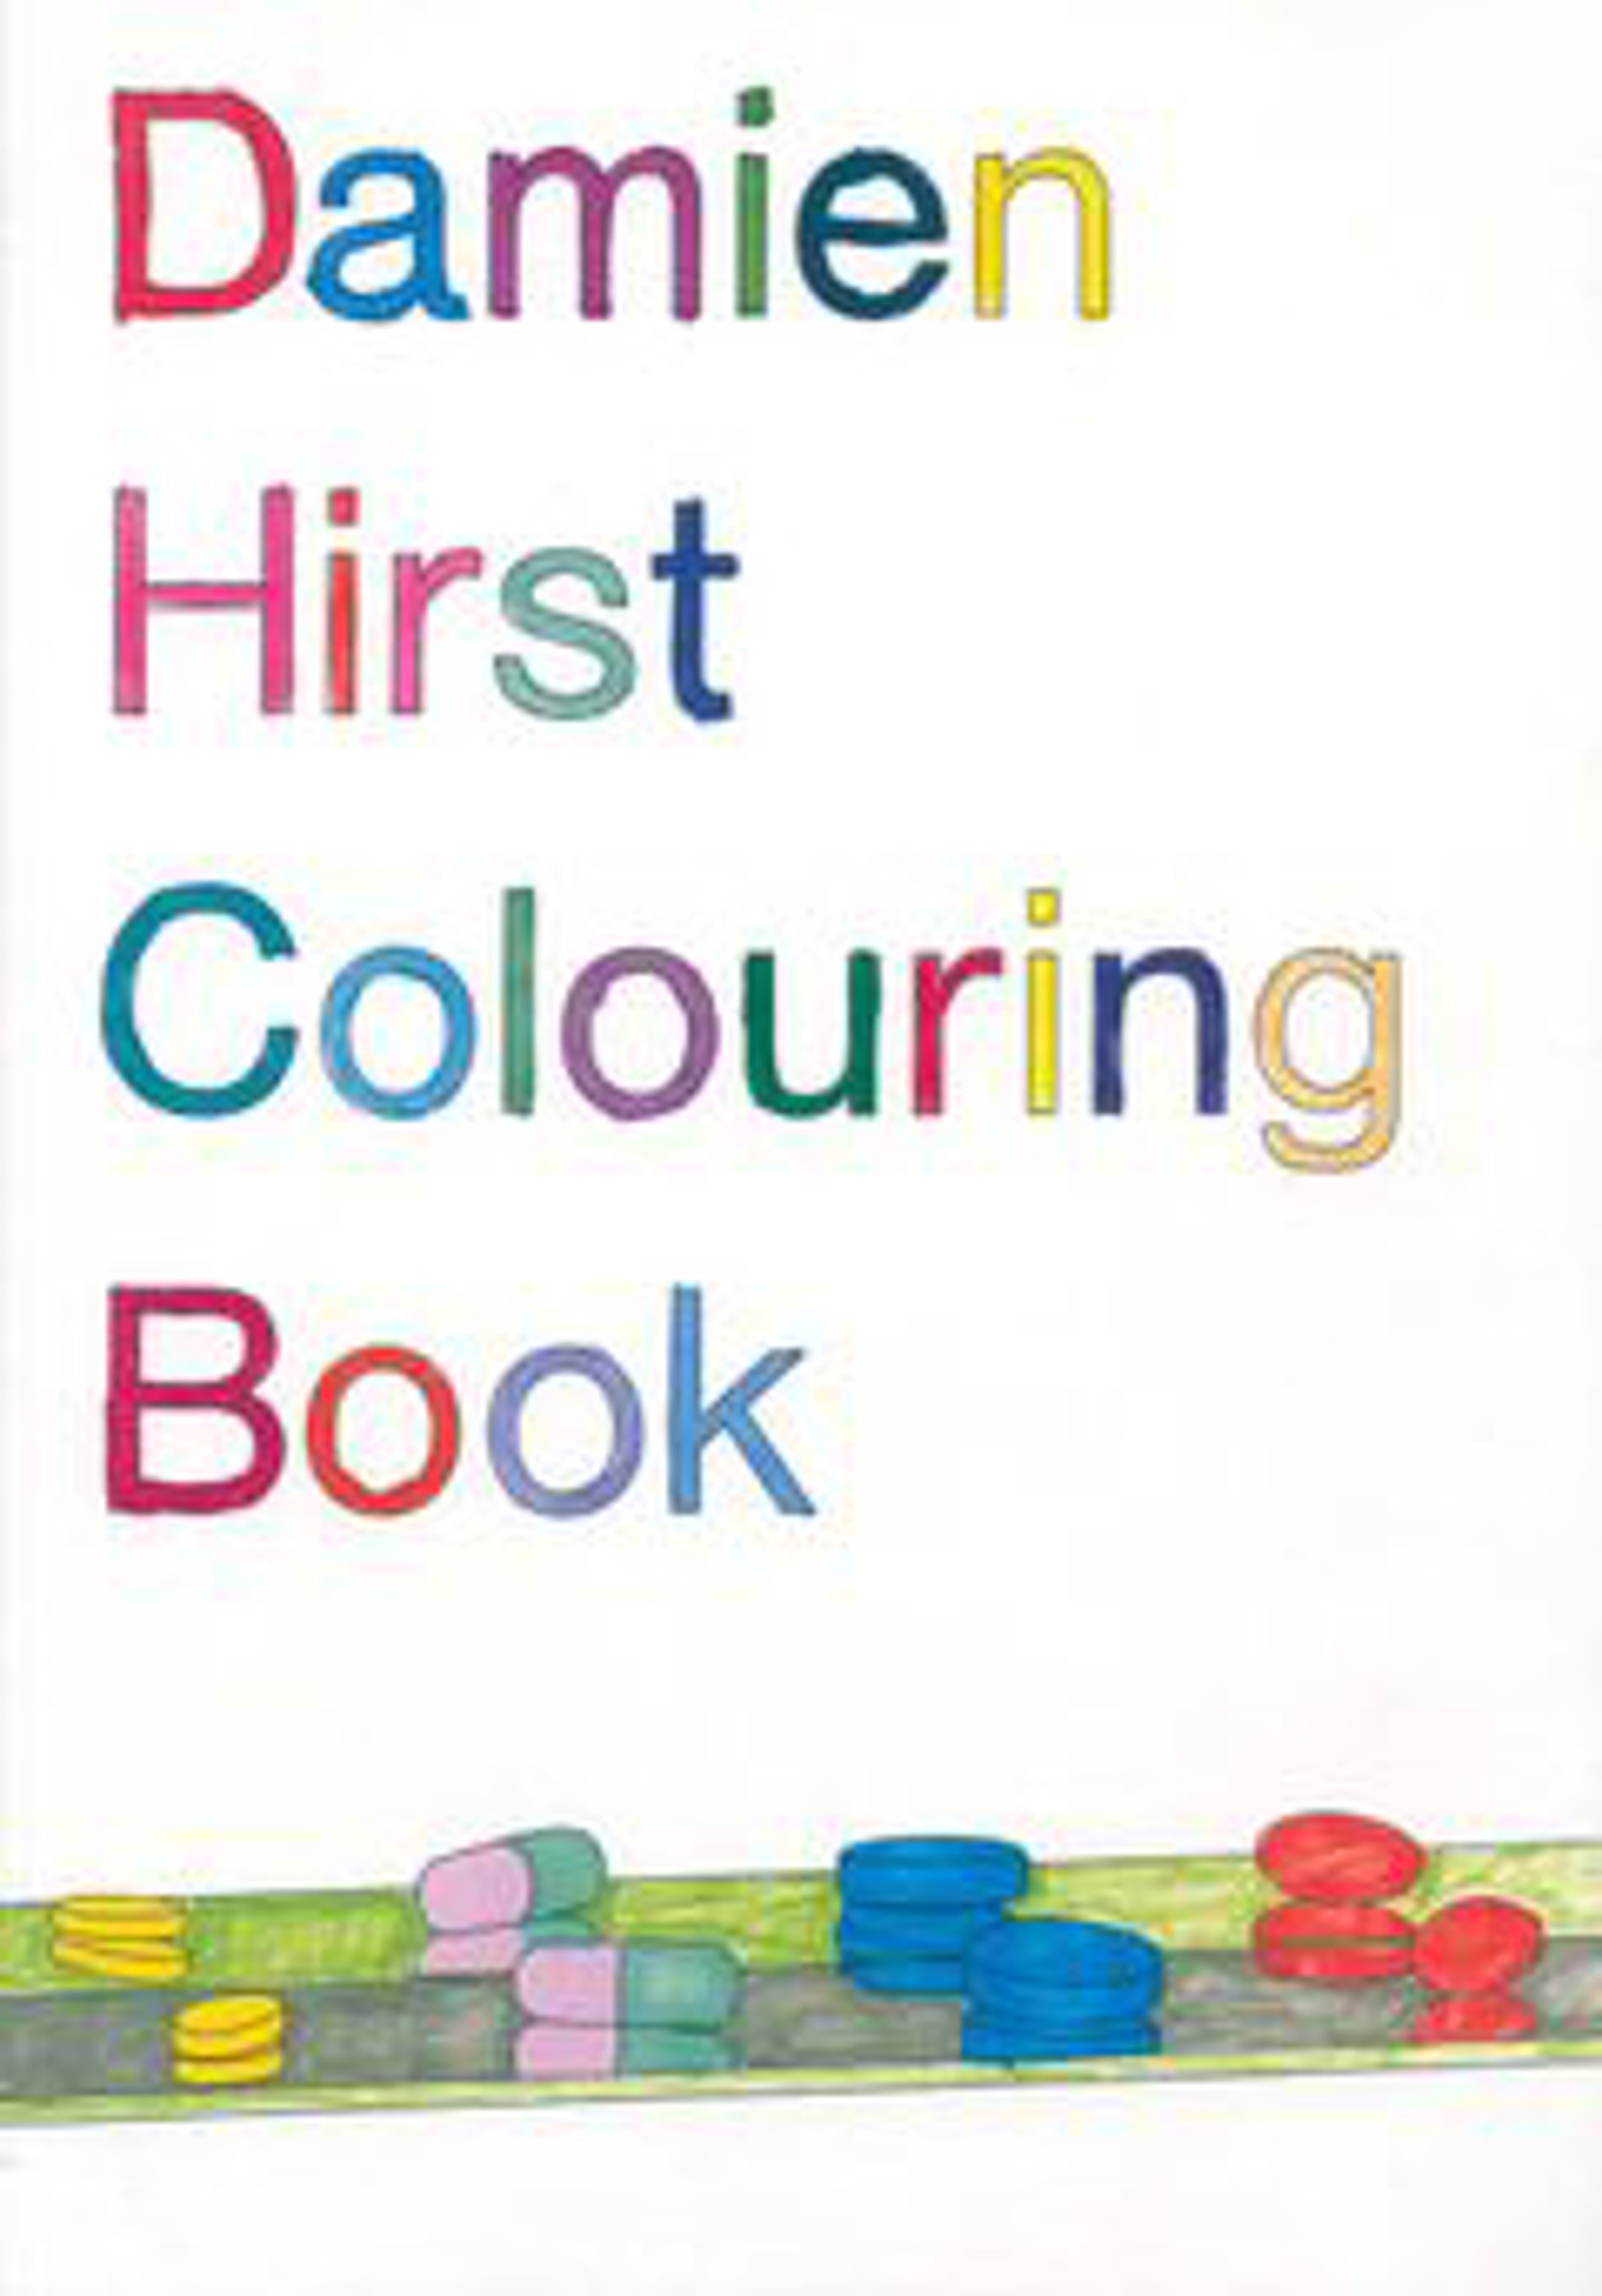 Damien Hirst: Coloring Book by Damien Hirst